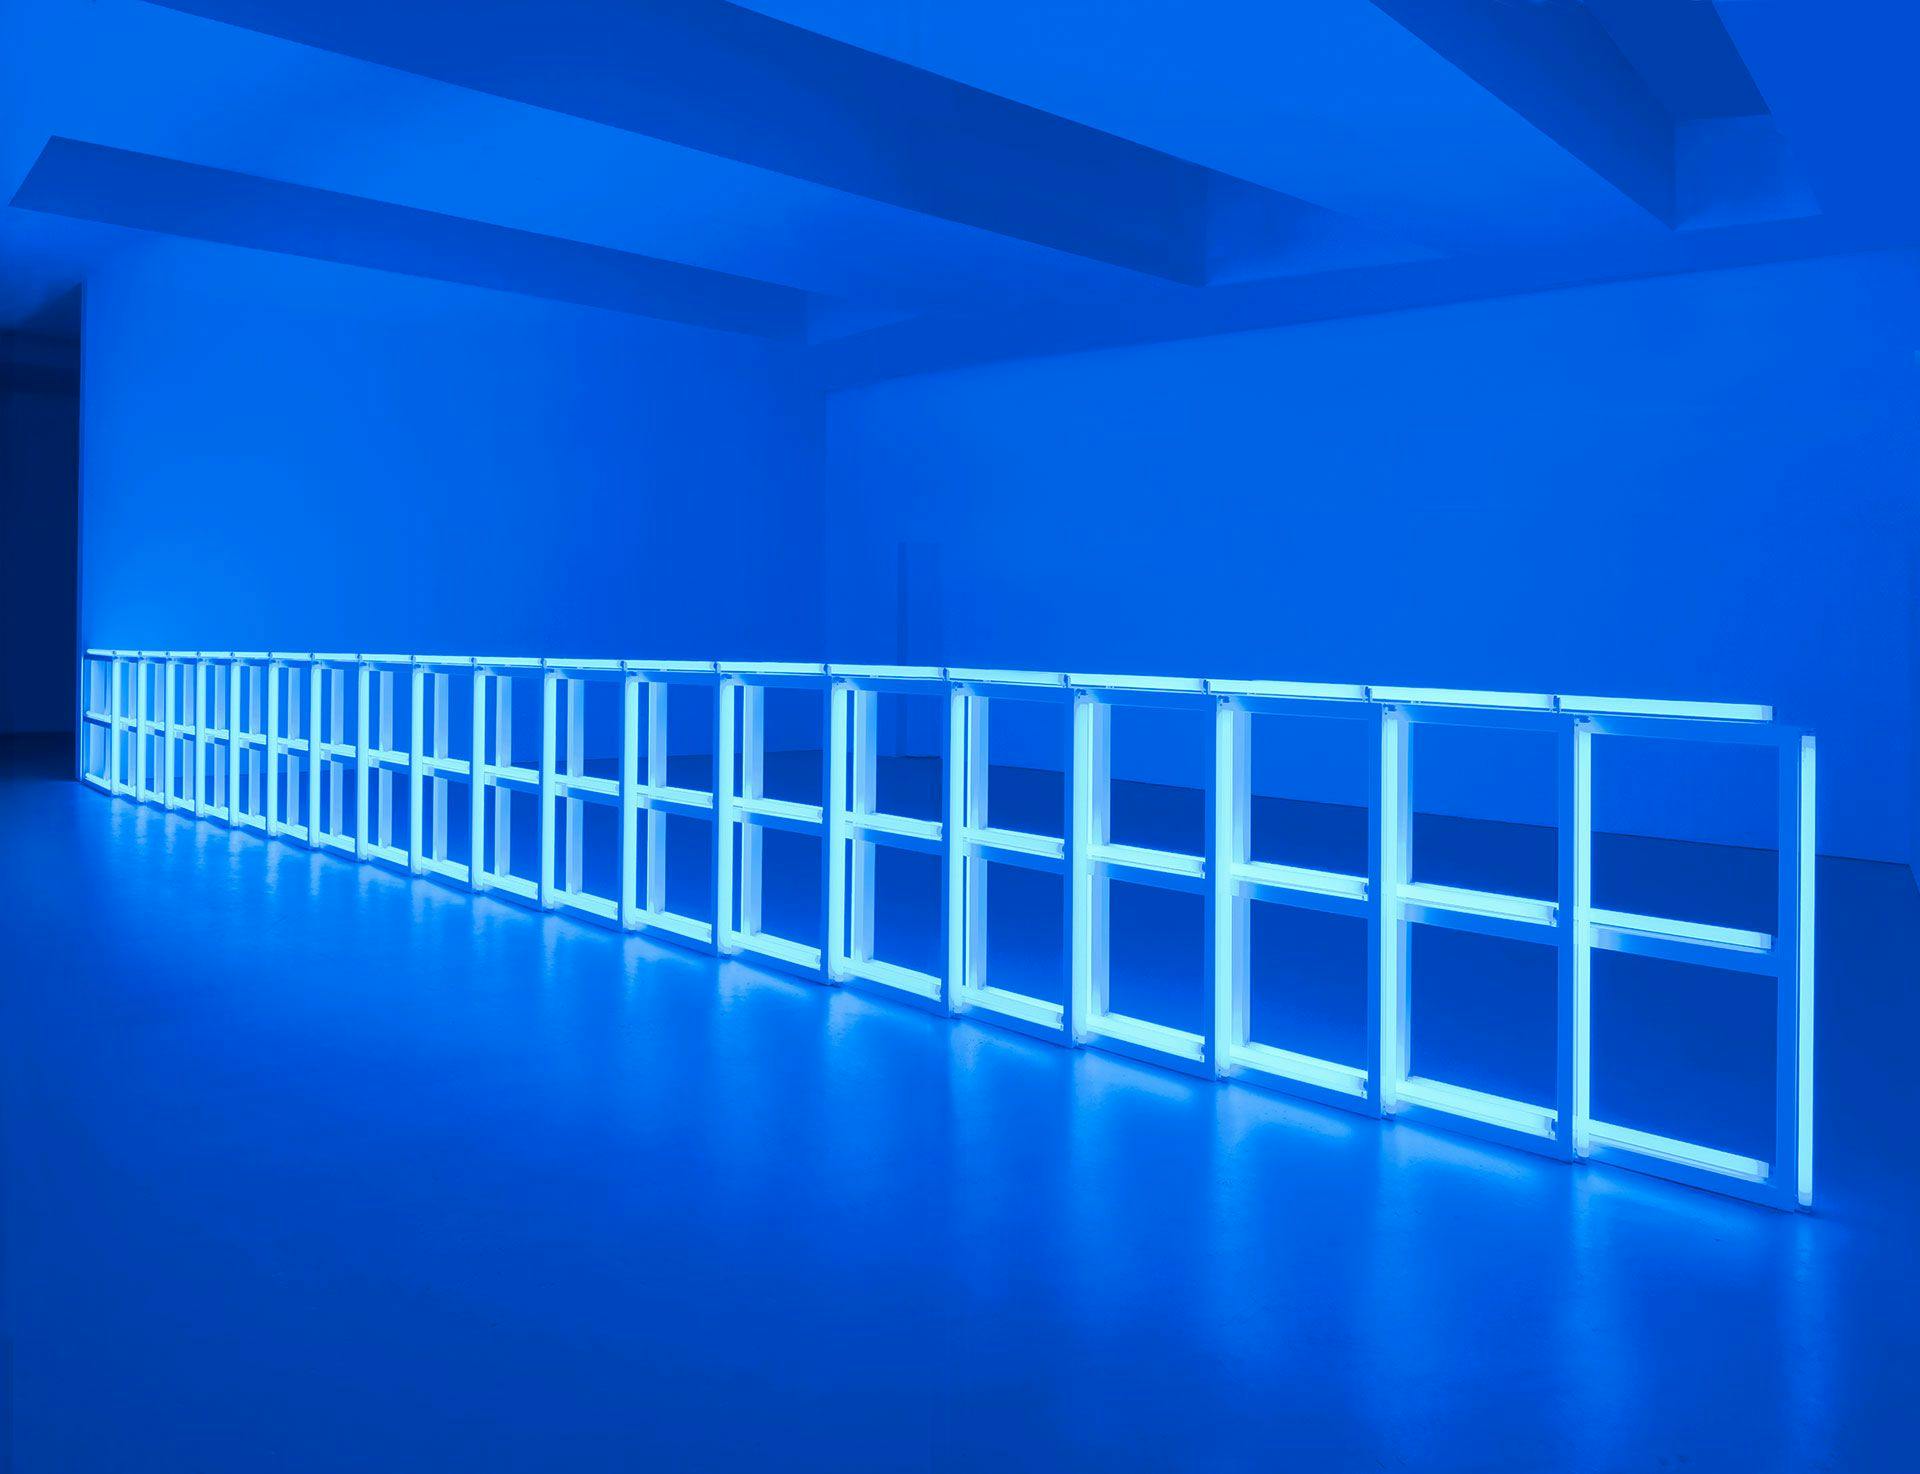 A sculpture in blue fluorescent light by Dan Flavin, titled untitled (to Helga and Carlo, with respect and affection), dated 1974.